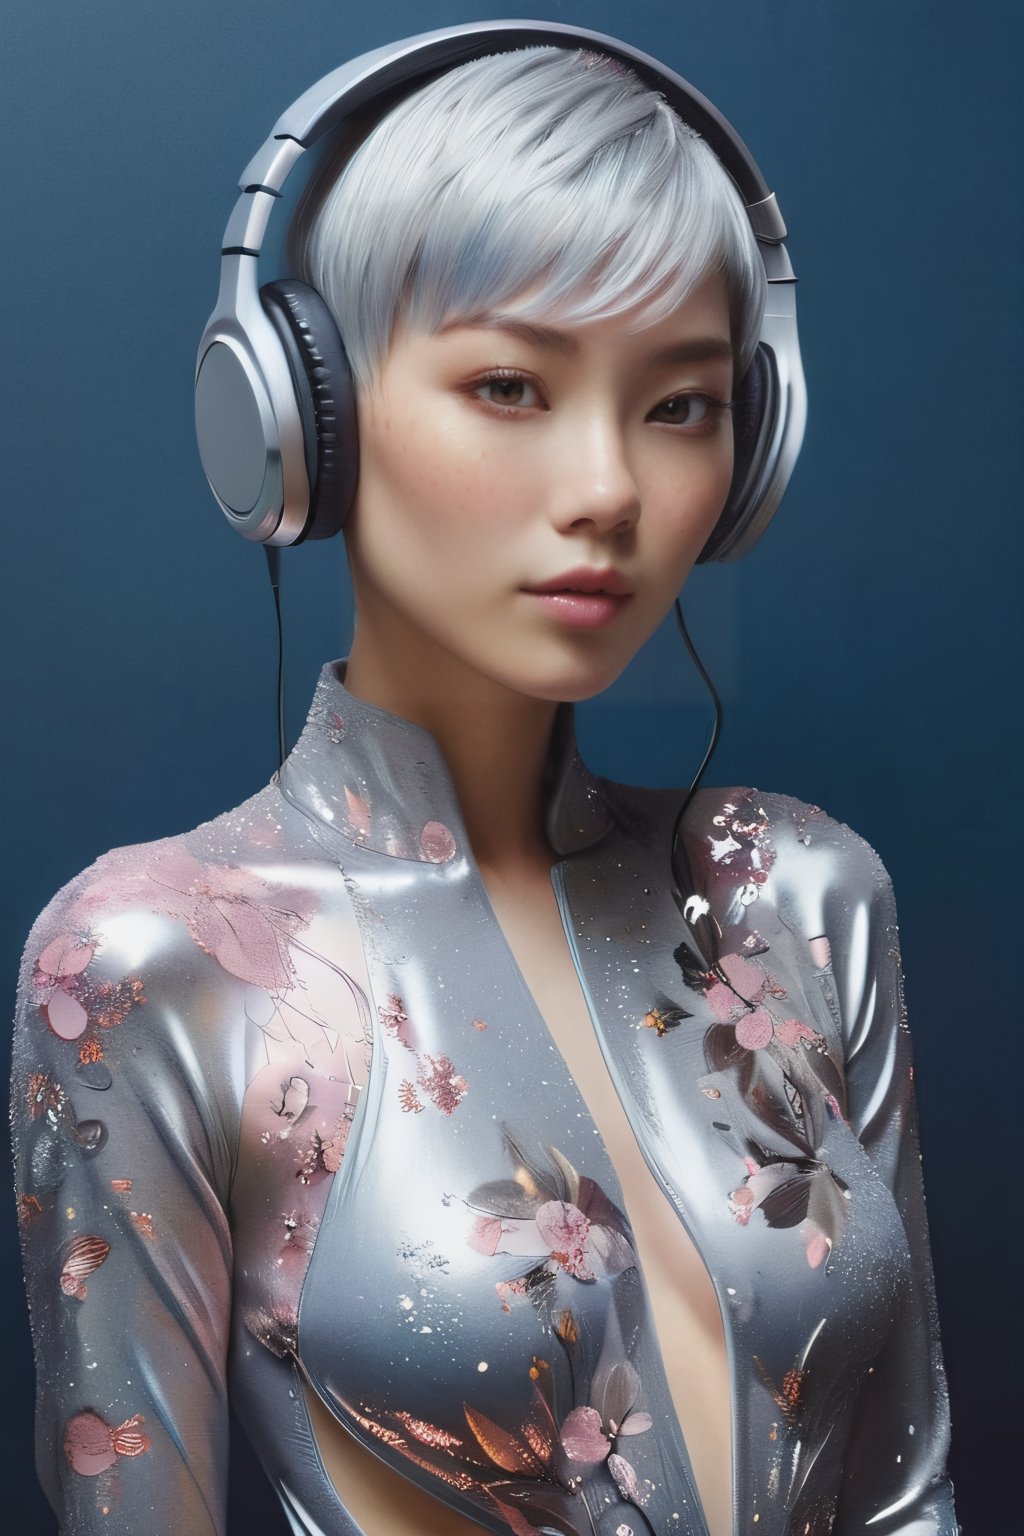 A stunning, vibrant digital drawing of a woman with short grey hair, wearing headphones and a muted-colored bodysuit, inspired by the artistic styles of James Jean, Jeremy Enecio, Ade Santora, and Aloysius O'Kelly. Frost clings to her skin, and she is draped in silk, reminiscent of sun-hyuk Kim's work. The overall aesthetic is a blend of Æon Flux, graffiti, ukiyo-e, painting, photography, and 3D render, creating a dark fantasy, conceptual art piece that combines elements of fashion, architecture, cinematic, wildlife photography, poster, and portrait photography. The woman is trending on Artforum, and the artwork was created by the talented artist, Sun-Hyuk Kim., poster, conceptual art, dark fantasy, cinematic, vibrant, illustration, portrait photography, fashion, anime, painting, product, architecture, photo, 3d render, wildlife photography, graffiti, ukiyo-e,glitter